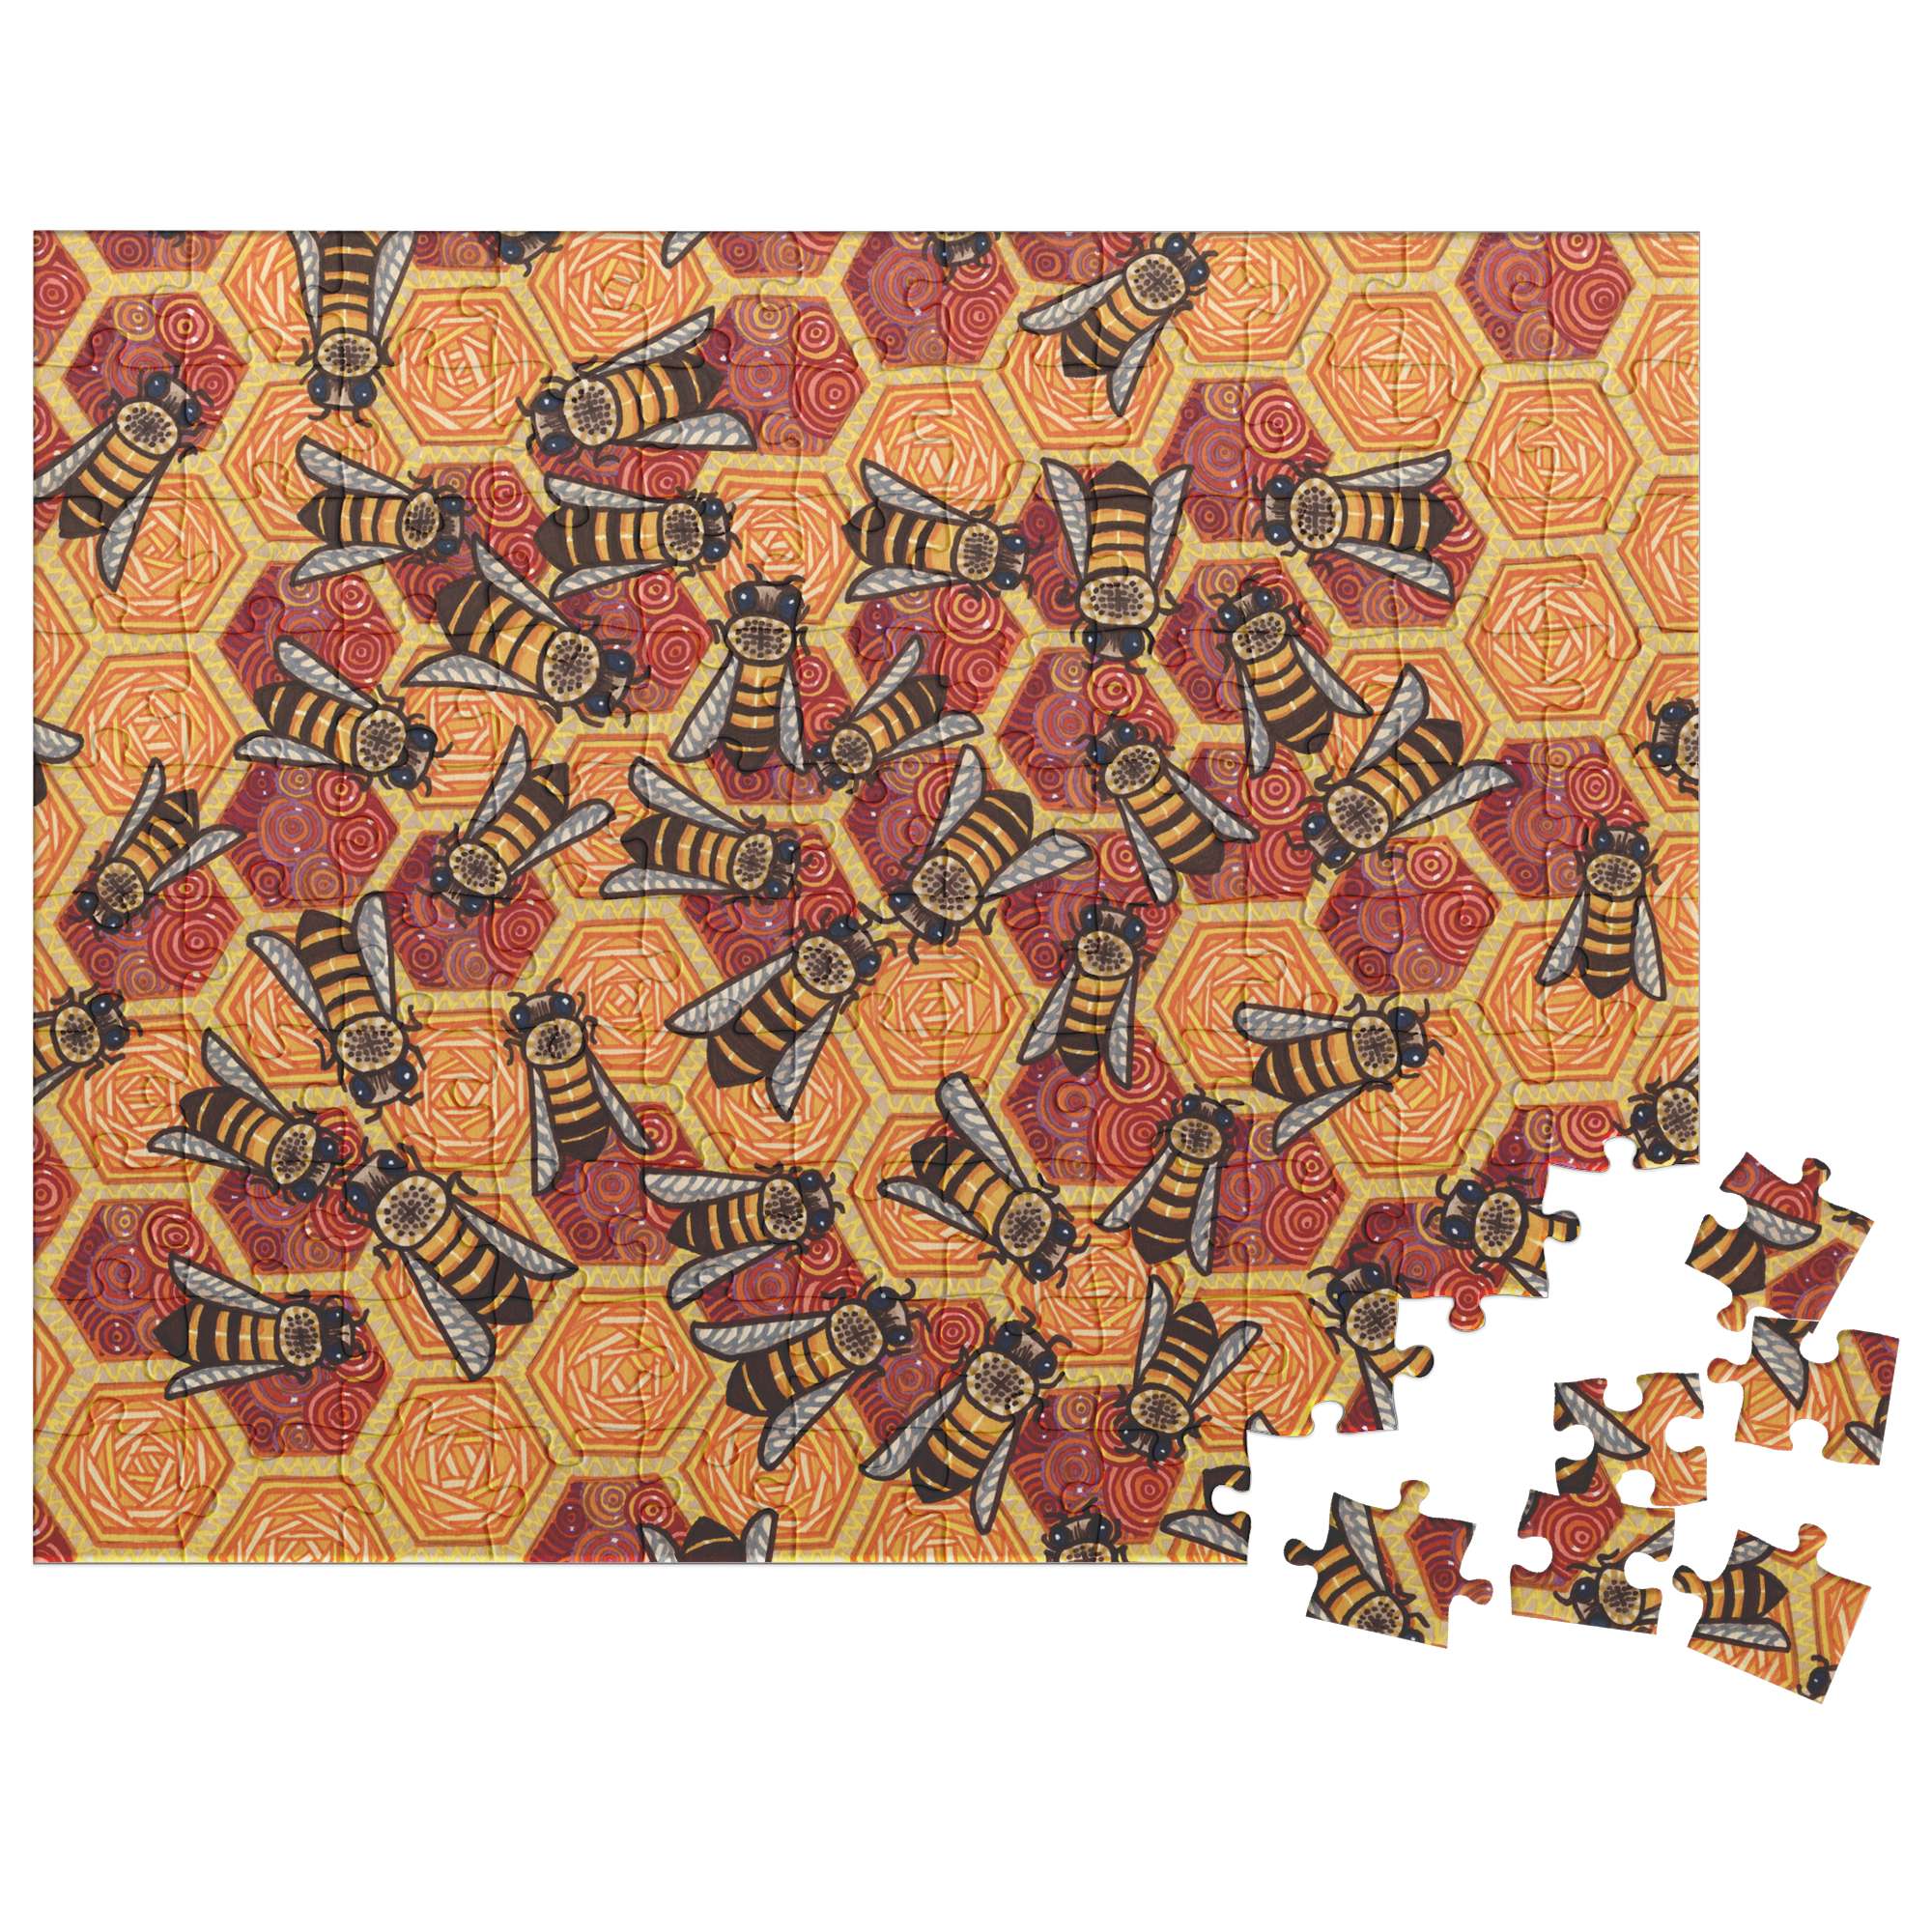 A Honeycomb Harmony Puzzle featuring a pattern of ornate bees on a detailed, geometric background, with one piece detached on the side.